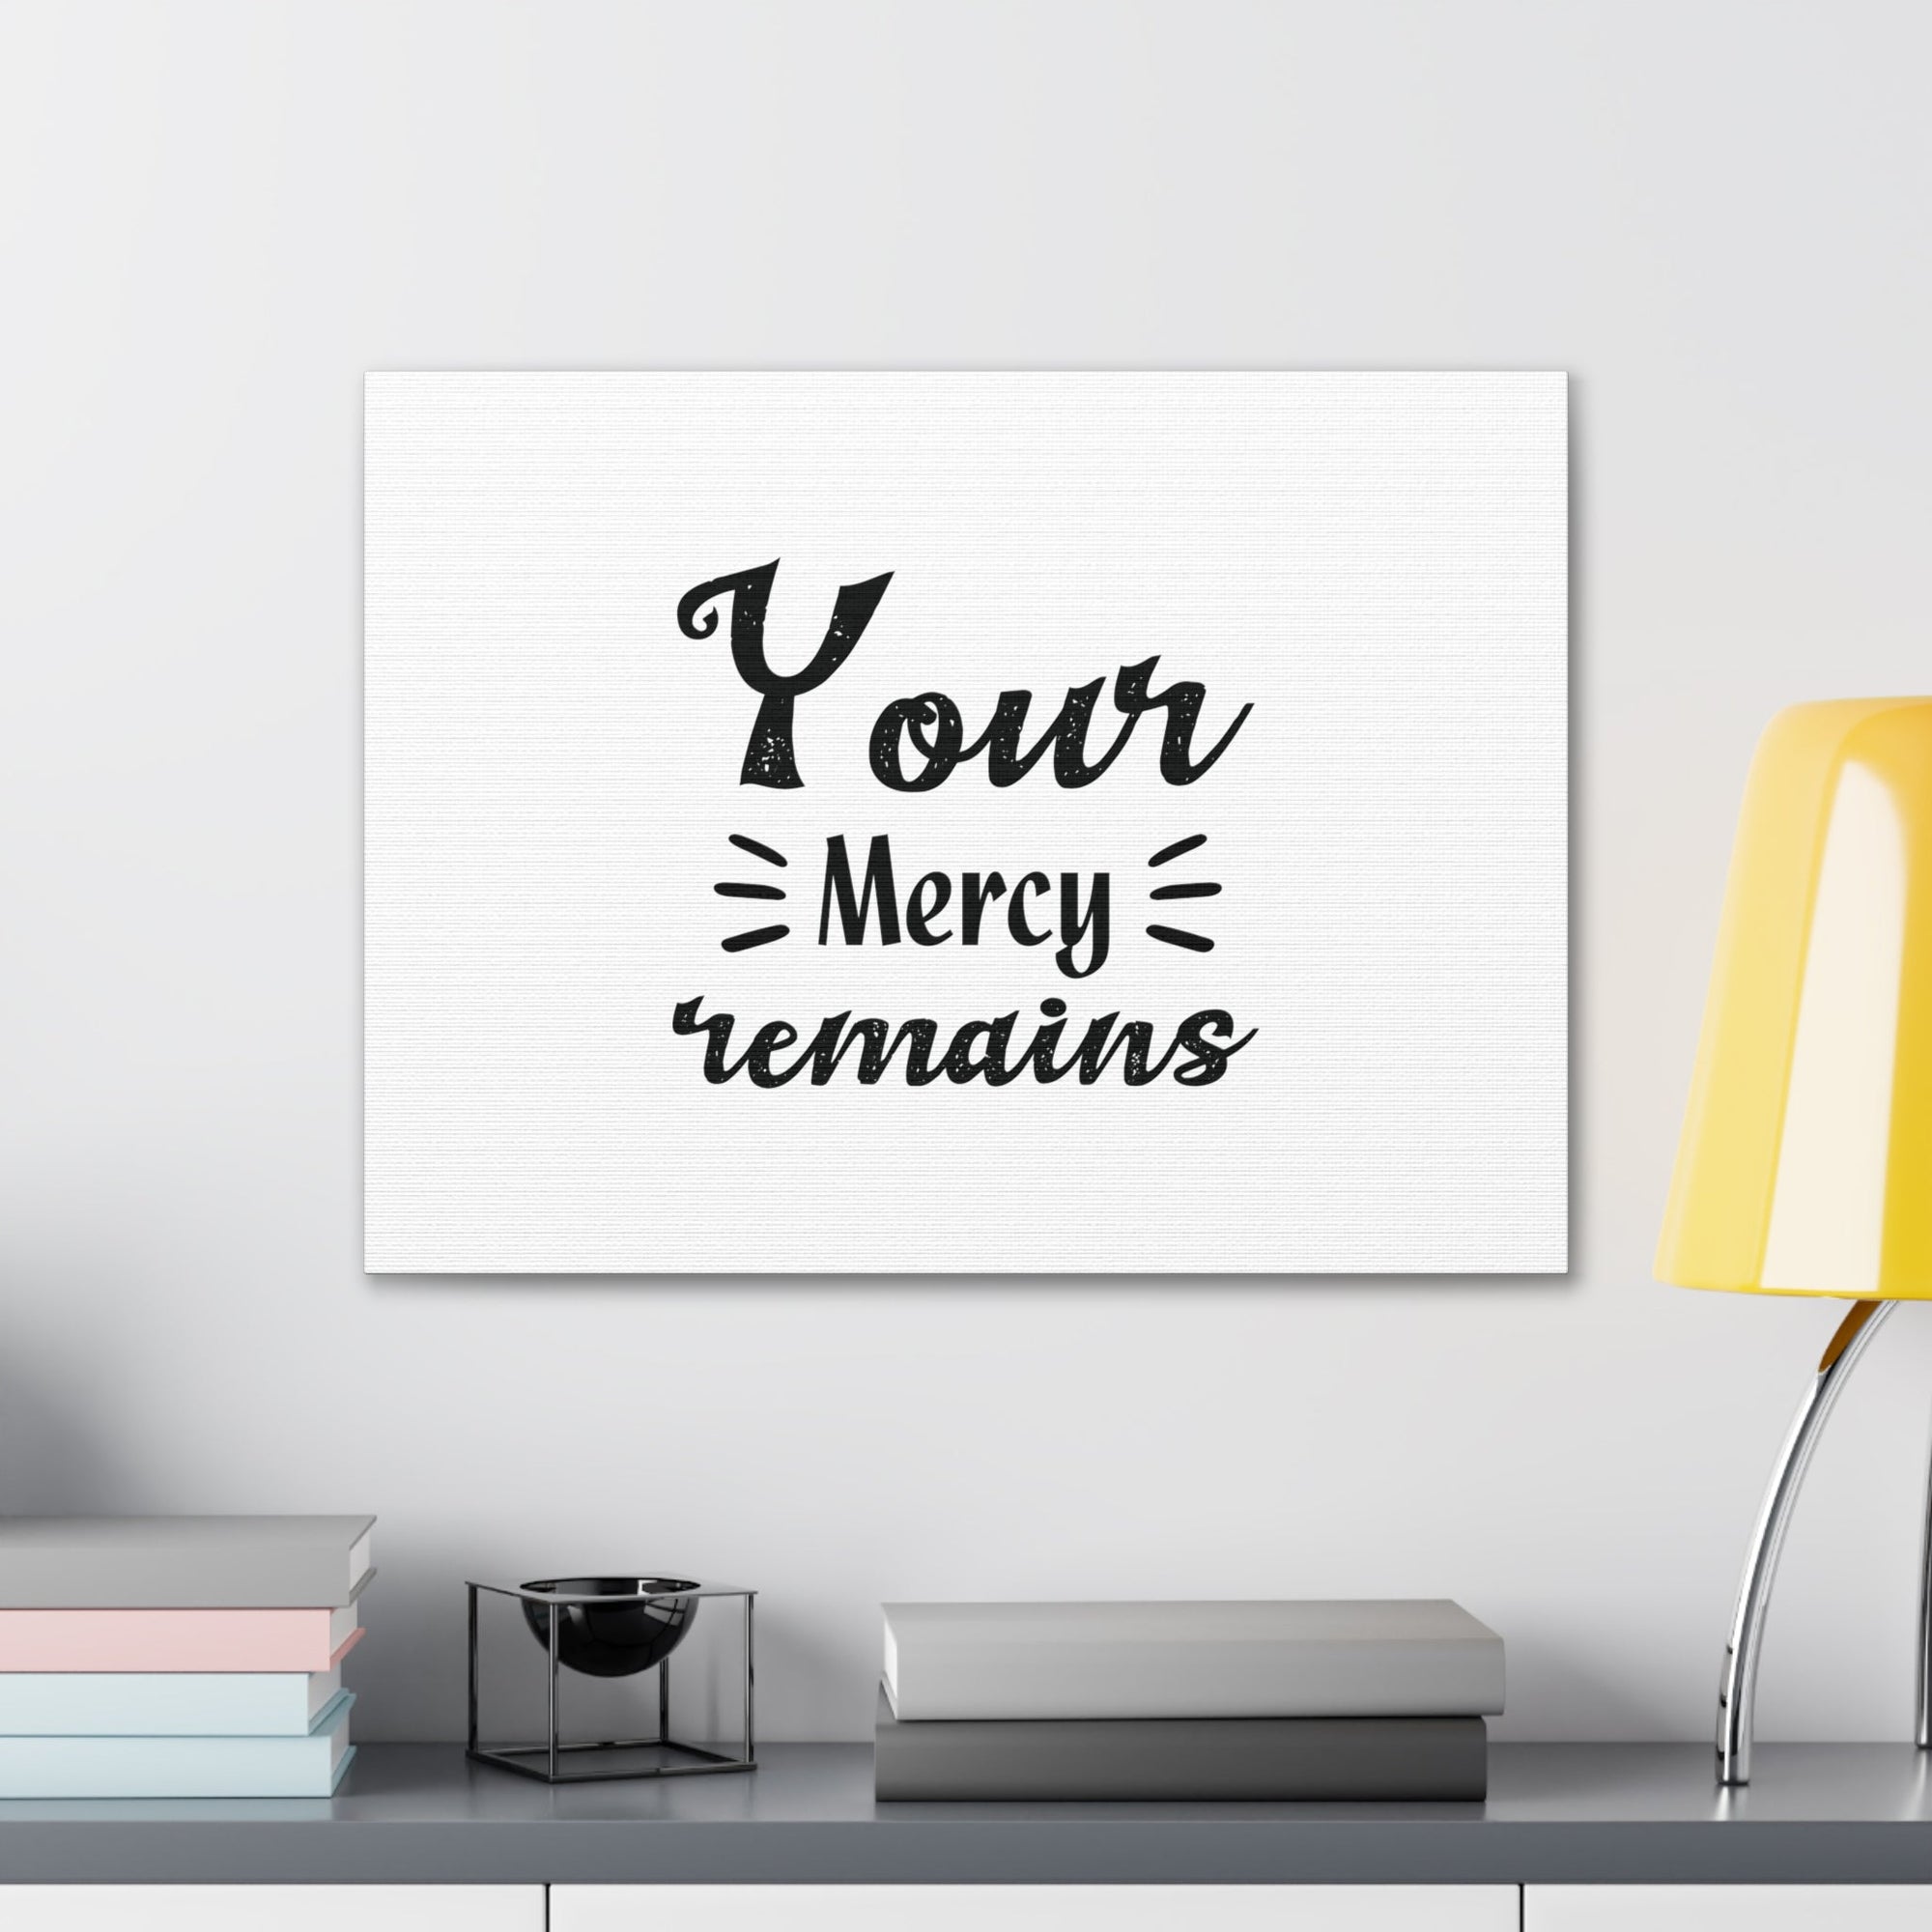 Scripture Walls Your Mercy Remains Titus 3:5 Christian Wall Art Bible Verse Print Ready to Hang Unframed-Express Your Love Gifts